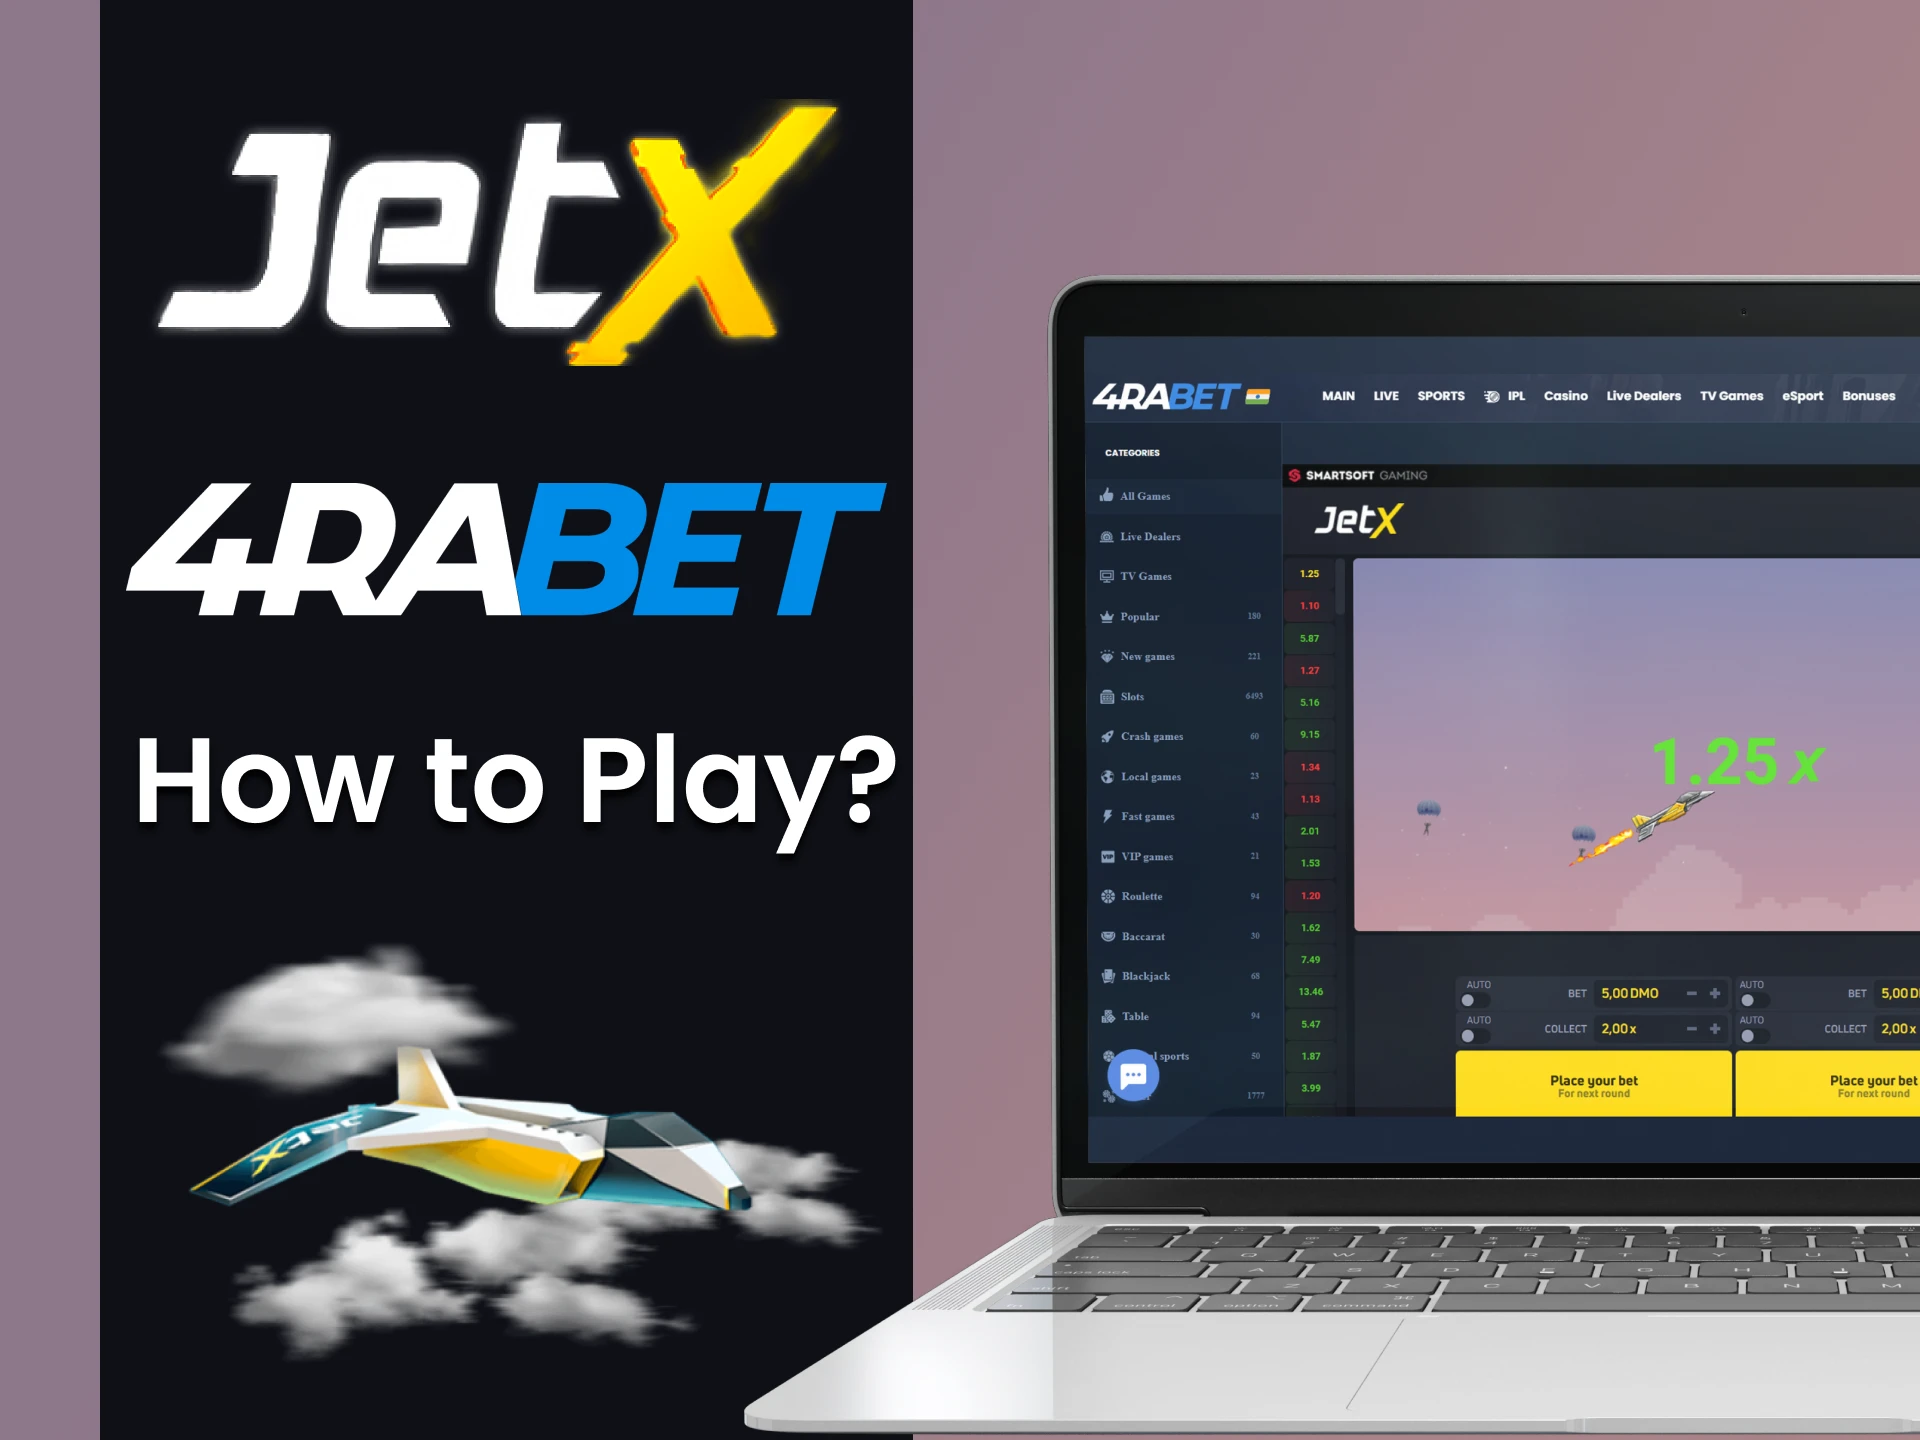 Choose JetX in the games section on the 4rabet website.